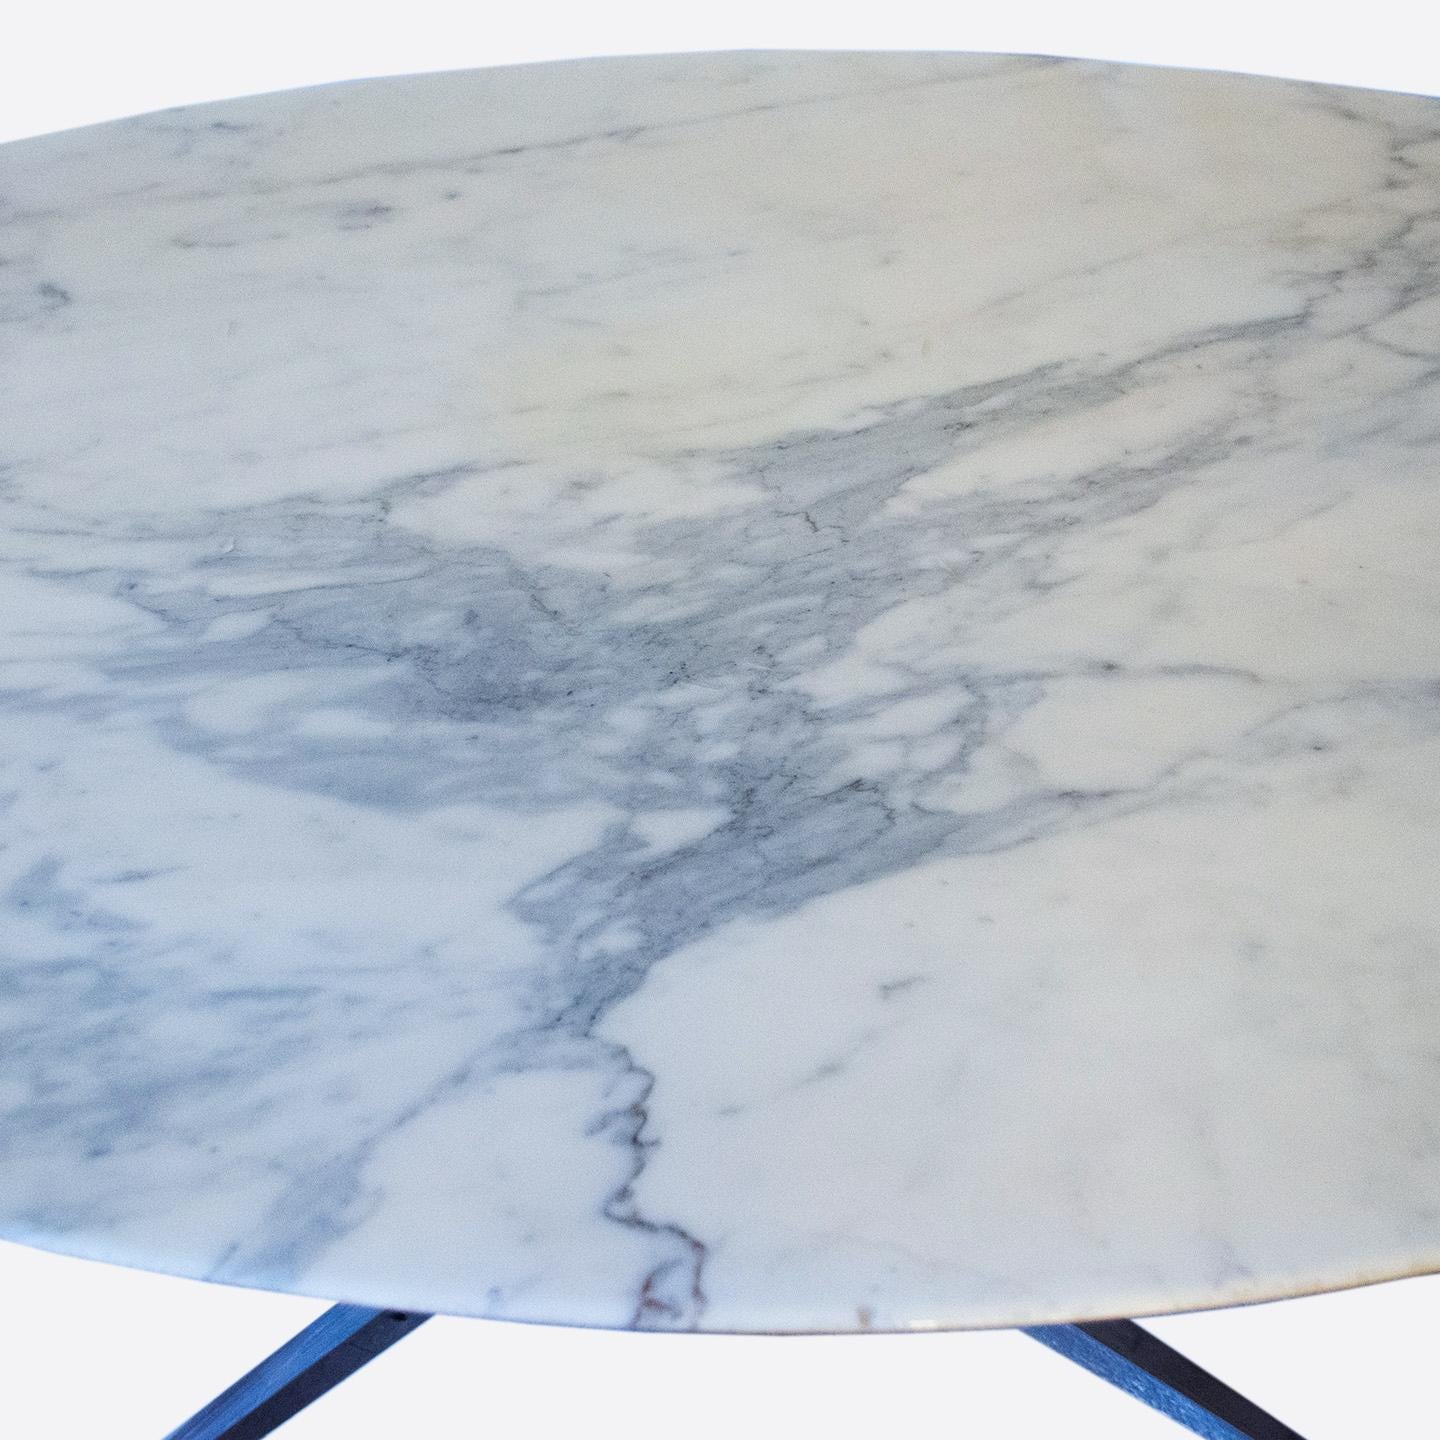 This Florence Knoll's iconic Mid-Century Modern oval dining table was designed and produced in the 1960's. The luxurious marble table top features a beautiful cool gray veining throughout and is set on a heavy gauge chromed steel base with four